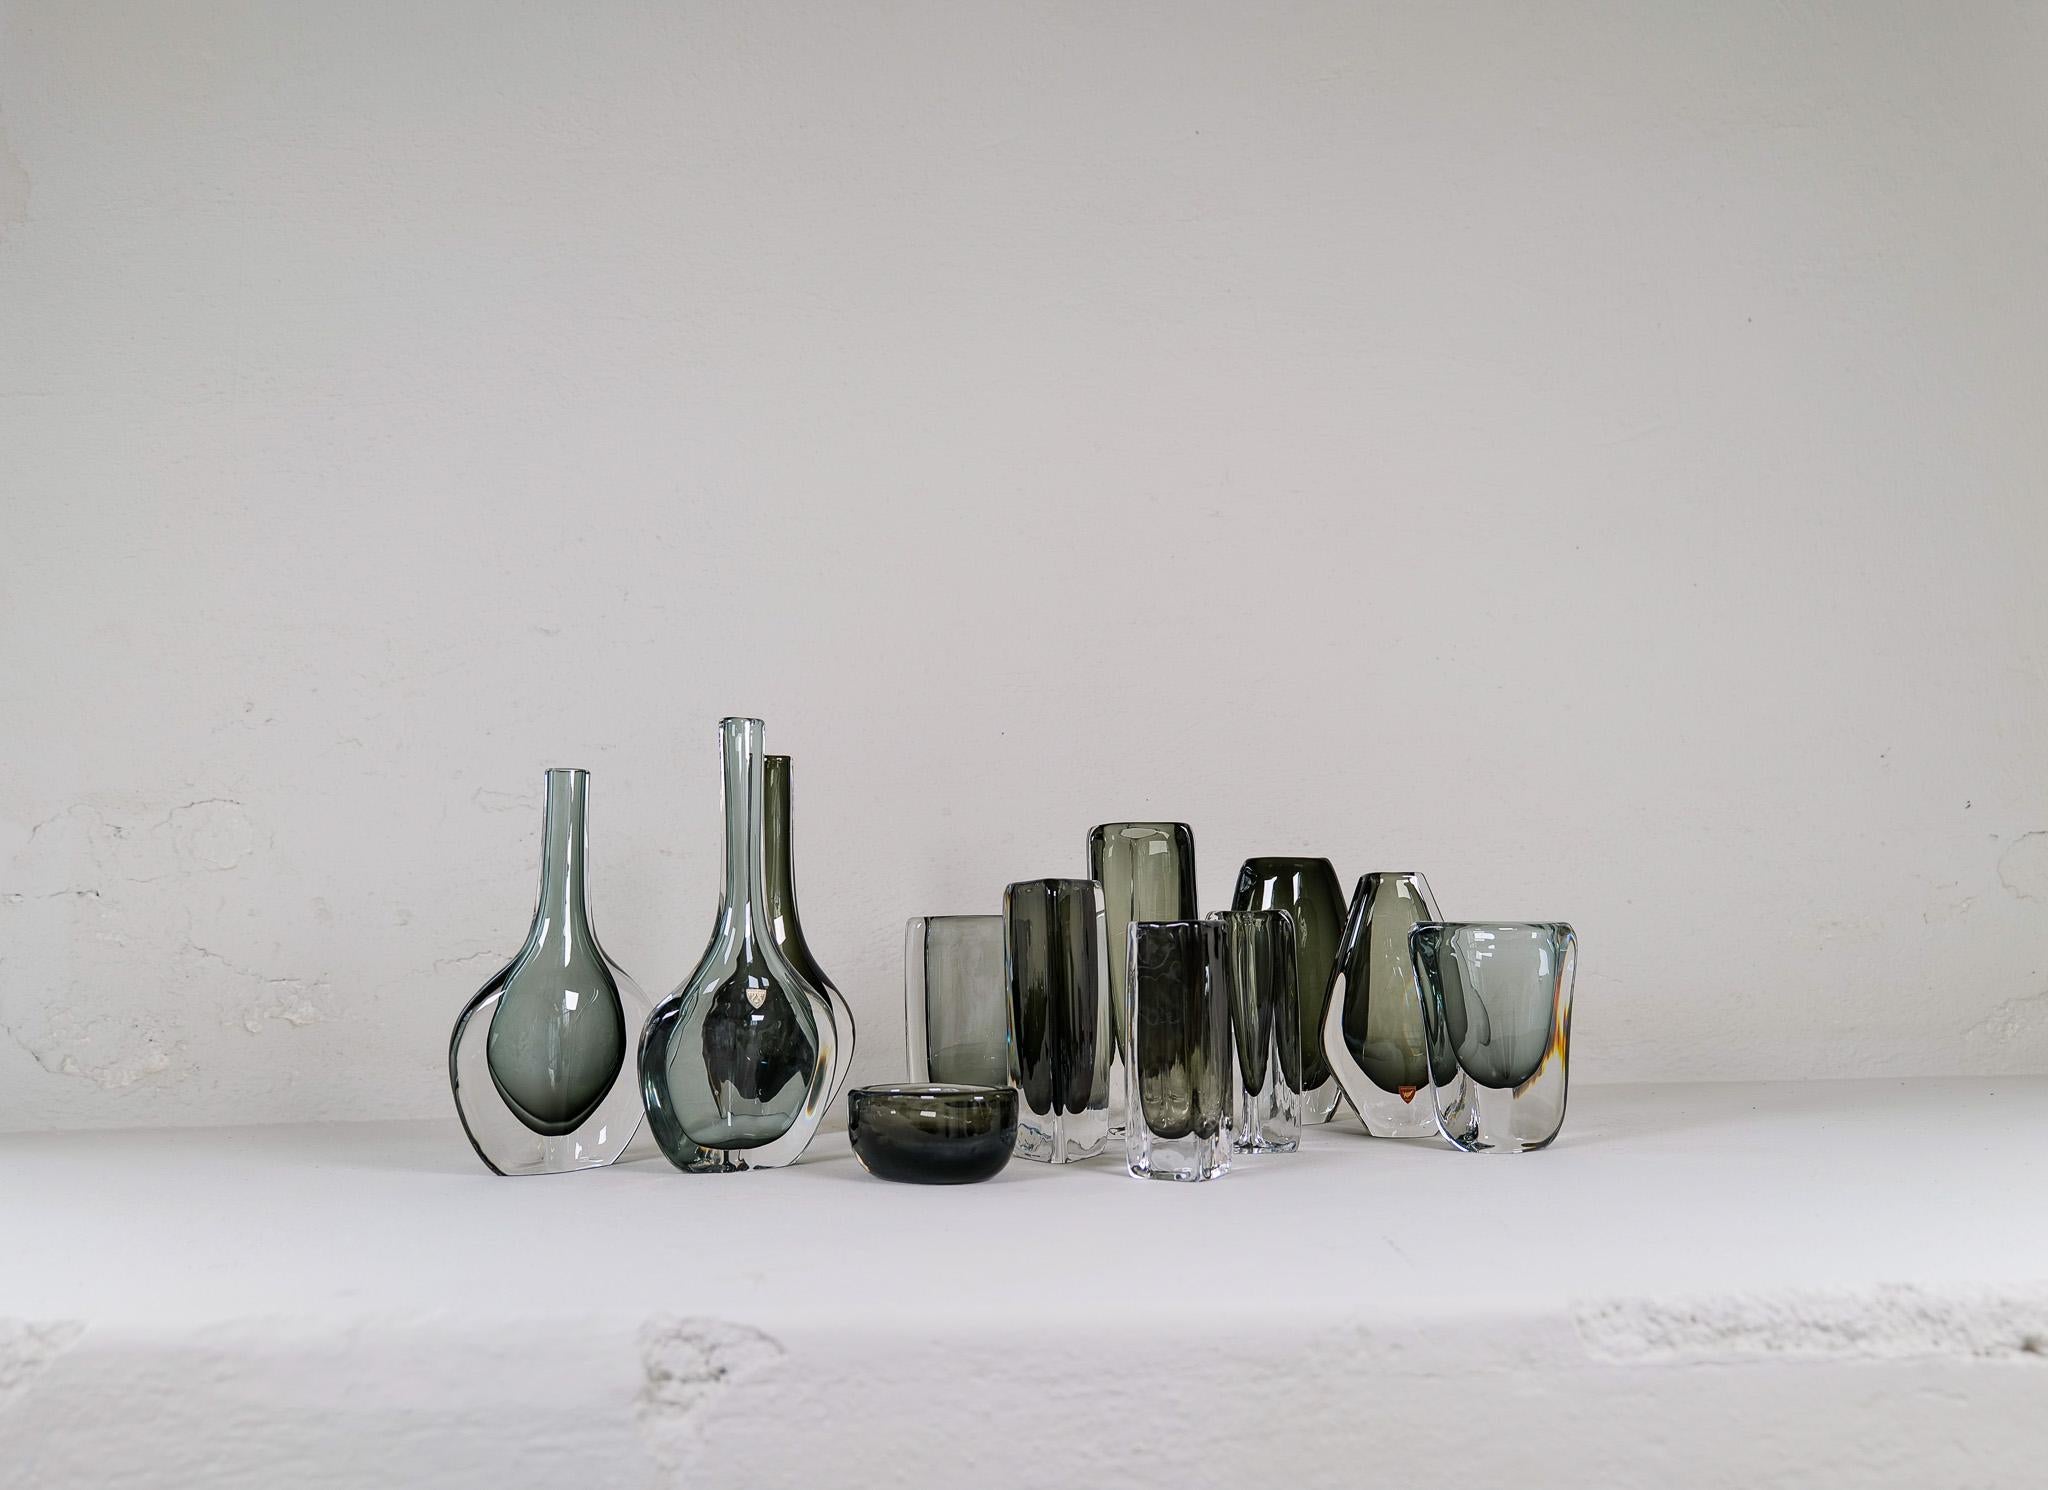 These 12 Swedish vintage Sommerso and dusk glass vases, produced circa 1950s-1960s by designer Nils Landberg for Orrefors, with smoked charcoal interior, cased within a clear layer. Great collection of different sizes and colors that all gives one